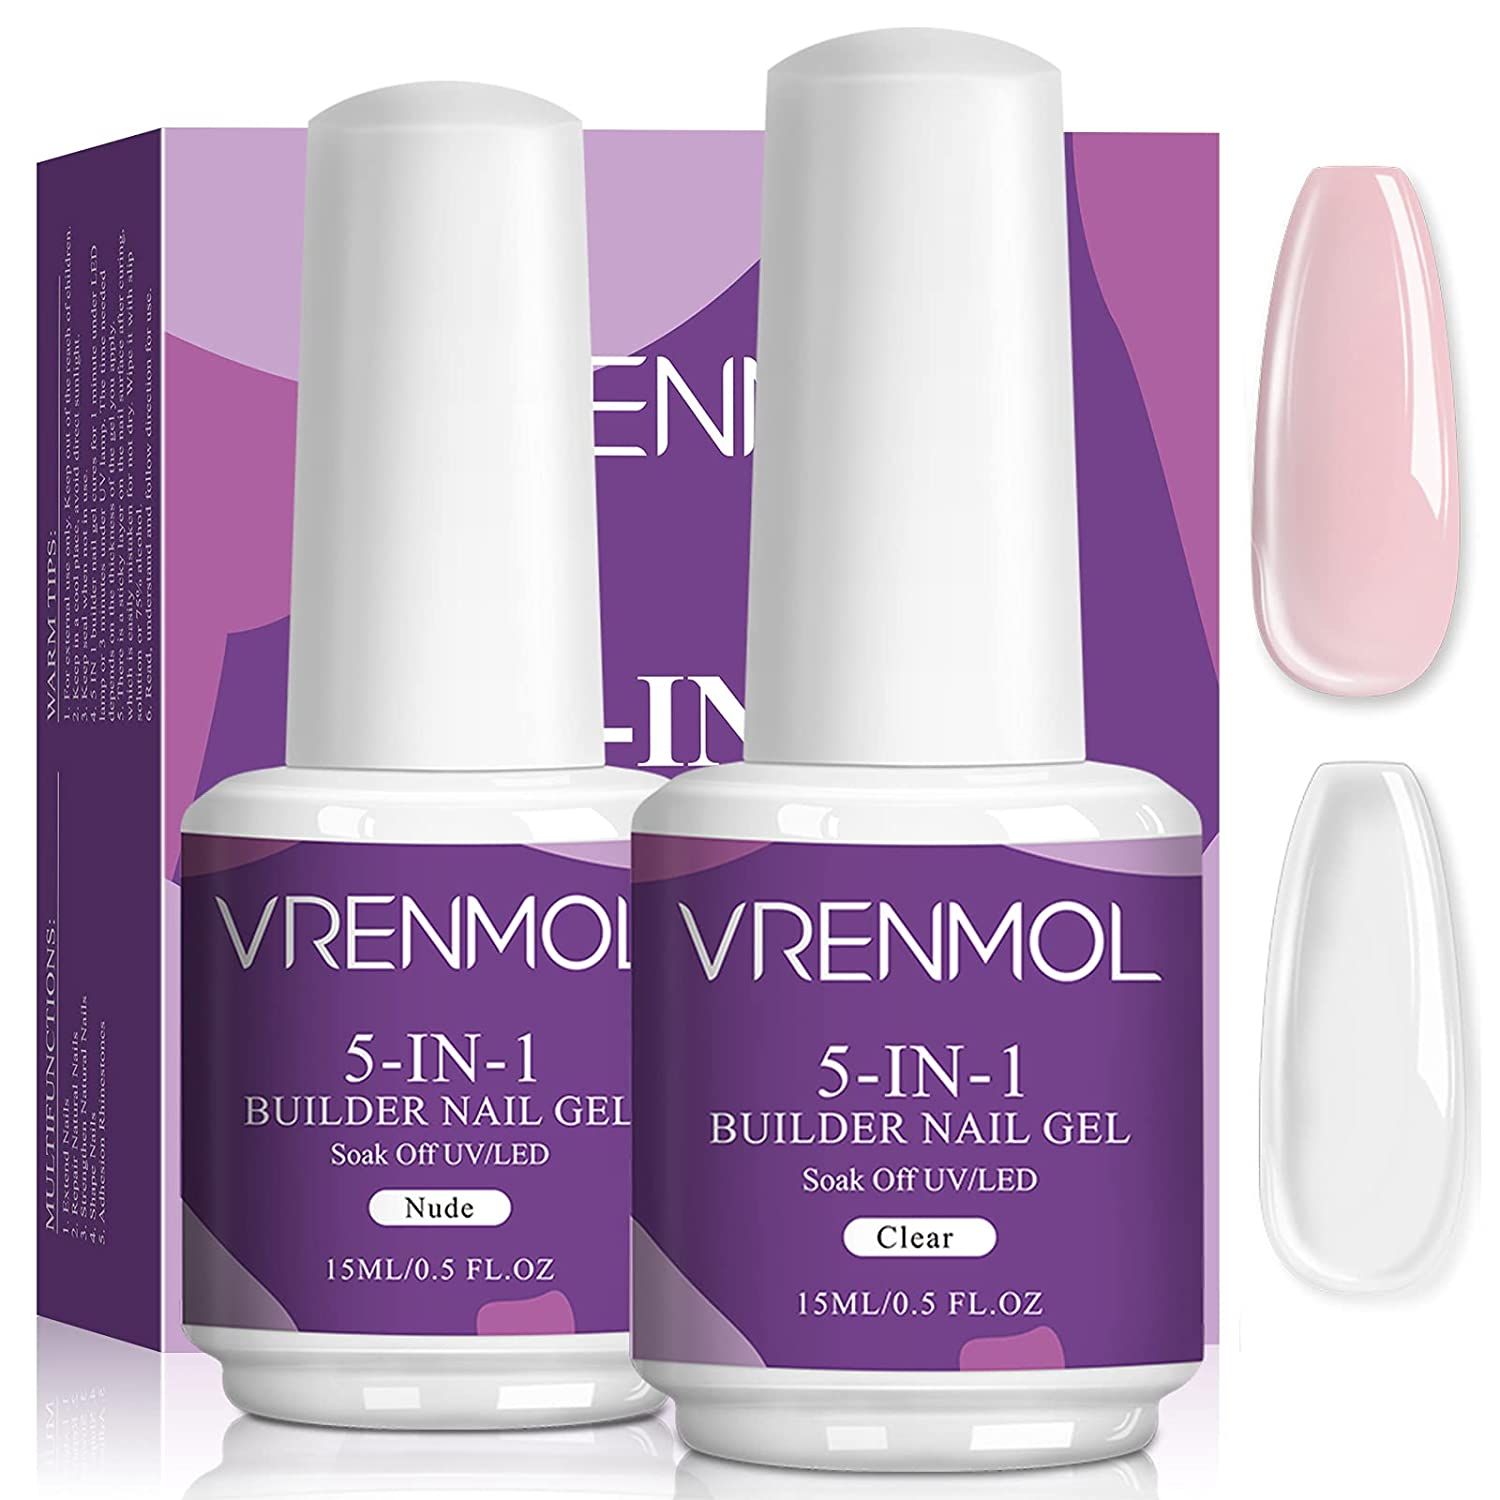 Amazon.com : Vrenmol 5 in 1 Builder Base Nail Gel in a Bottle - 15ml Clear & Nude Brush On Builder Nail Gel Set Nail Extension Gel $5.99